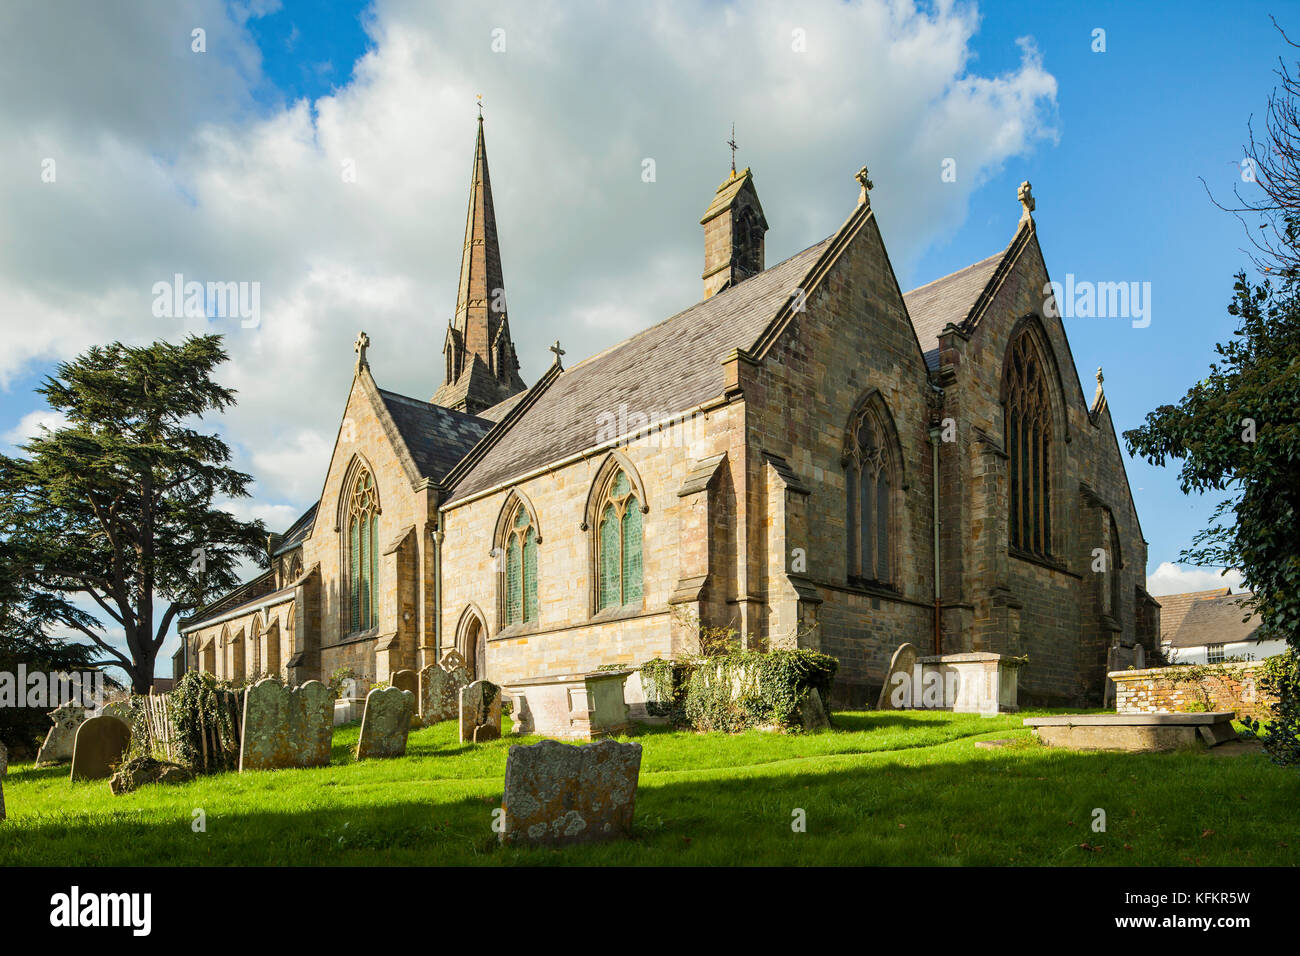 Holy Trinity church in Hurstpierpoint, West Sussex, England. Stock Photo